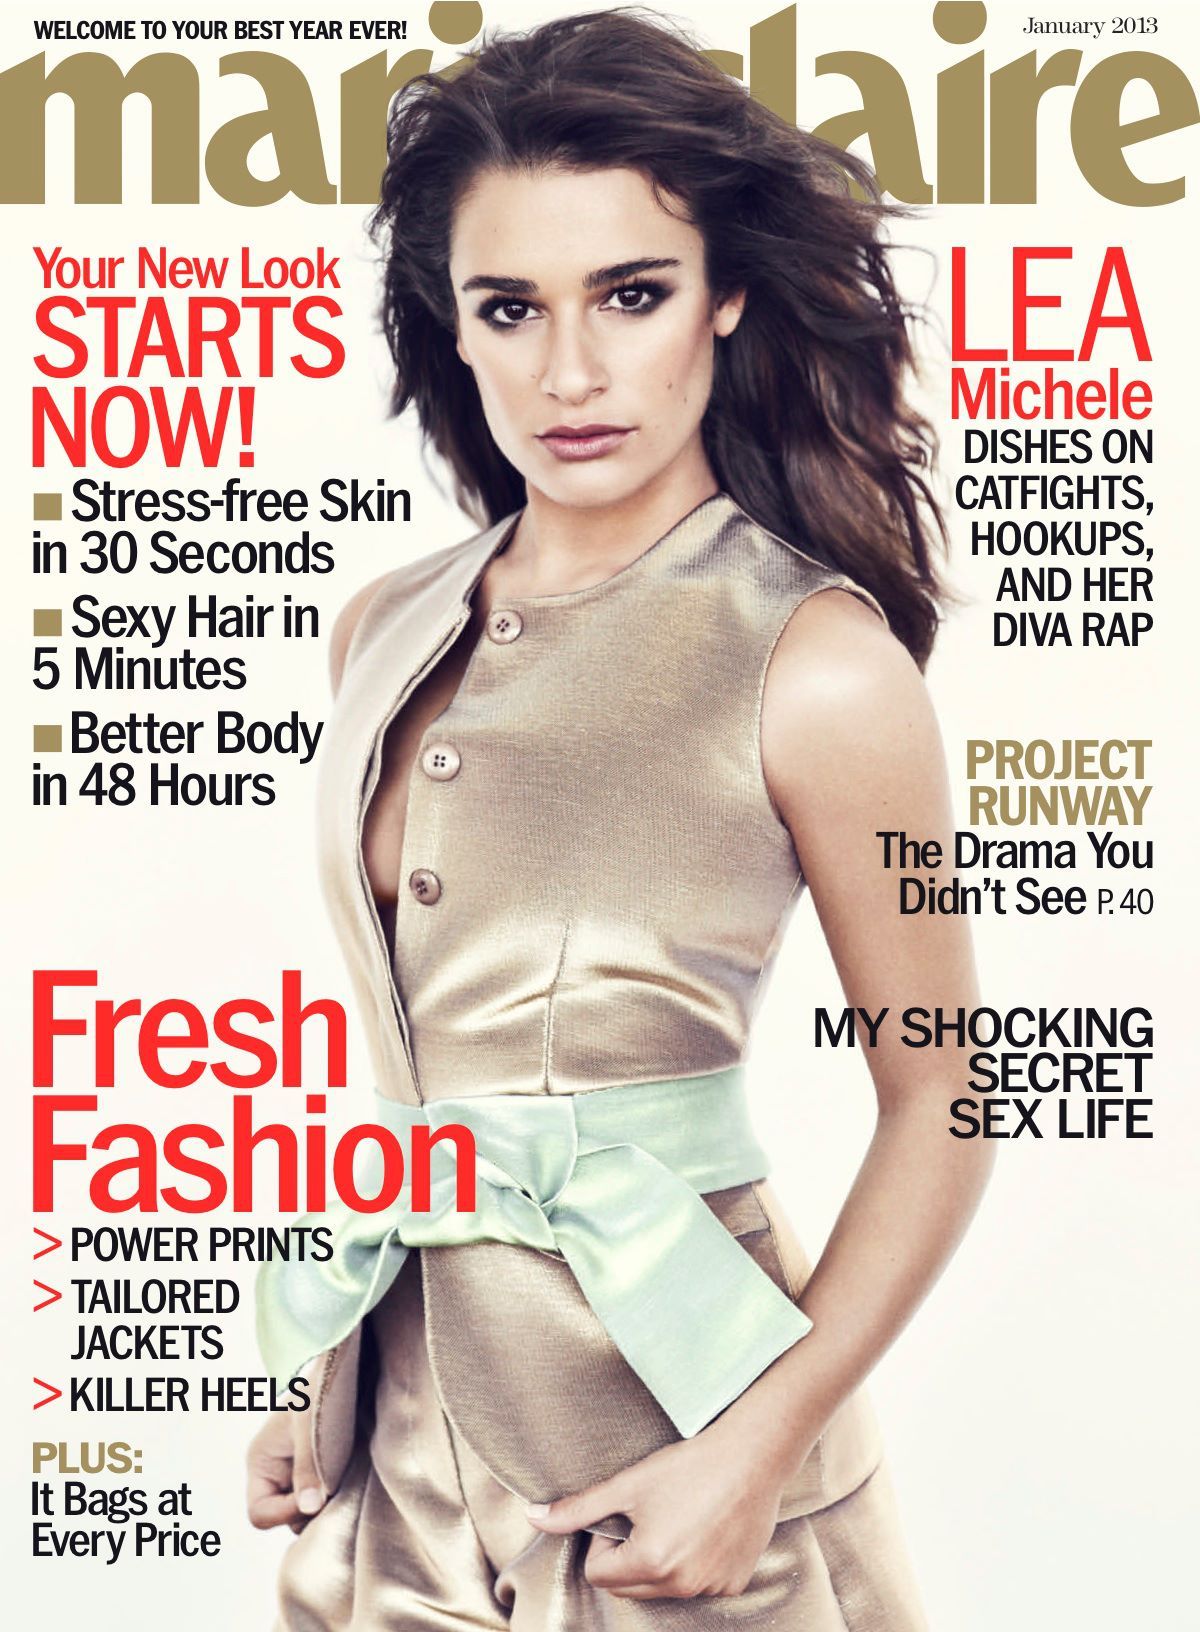 Lea Michele in Marie Claire Photoshoot - January 2013